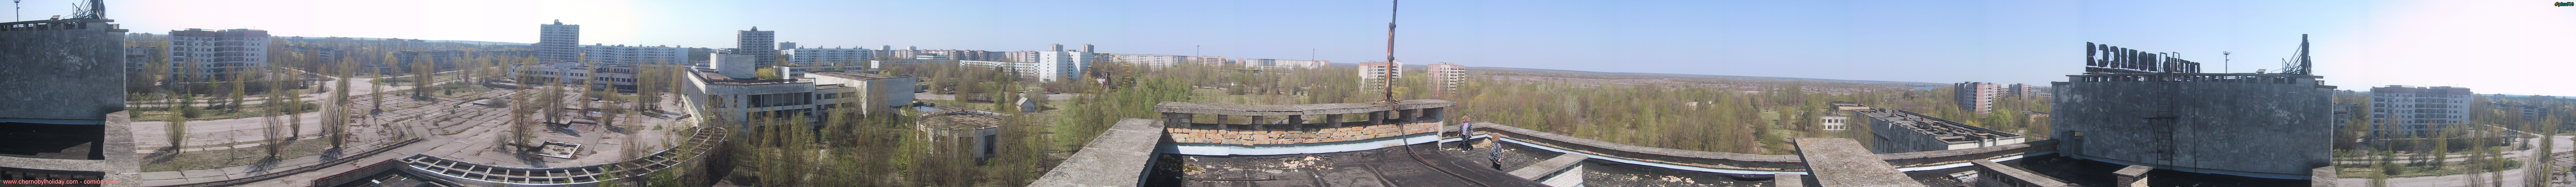 Chernobyl - Prypyat ghost city panoramic (click to zoom)